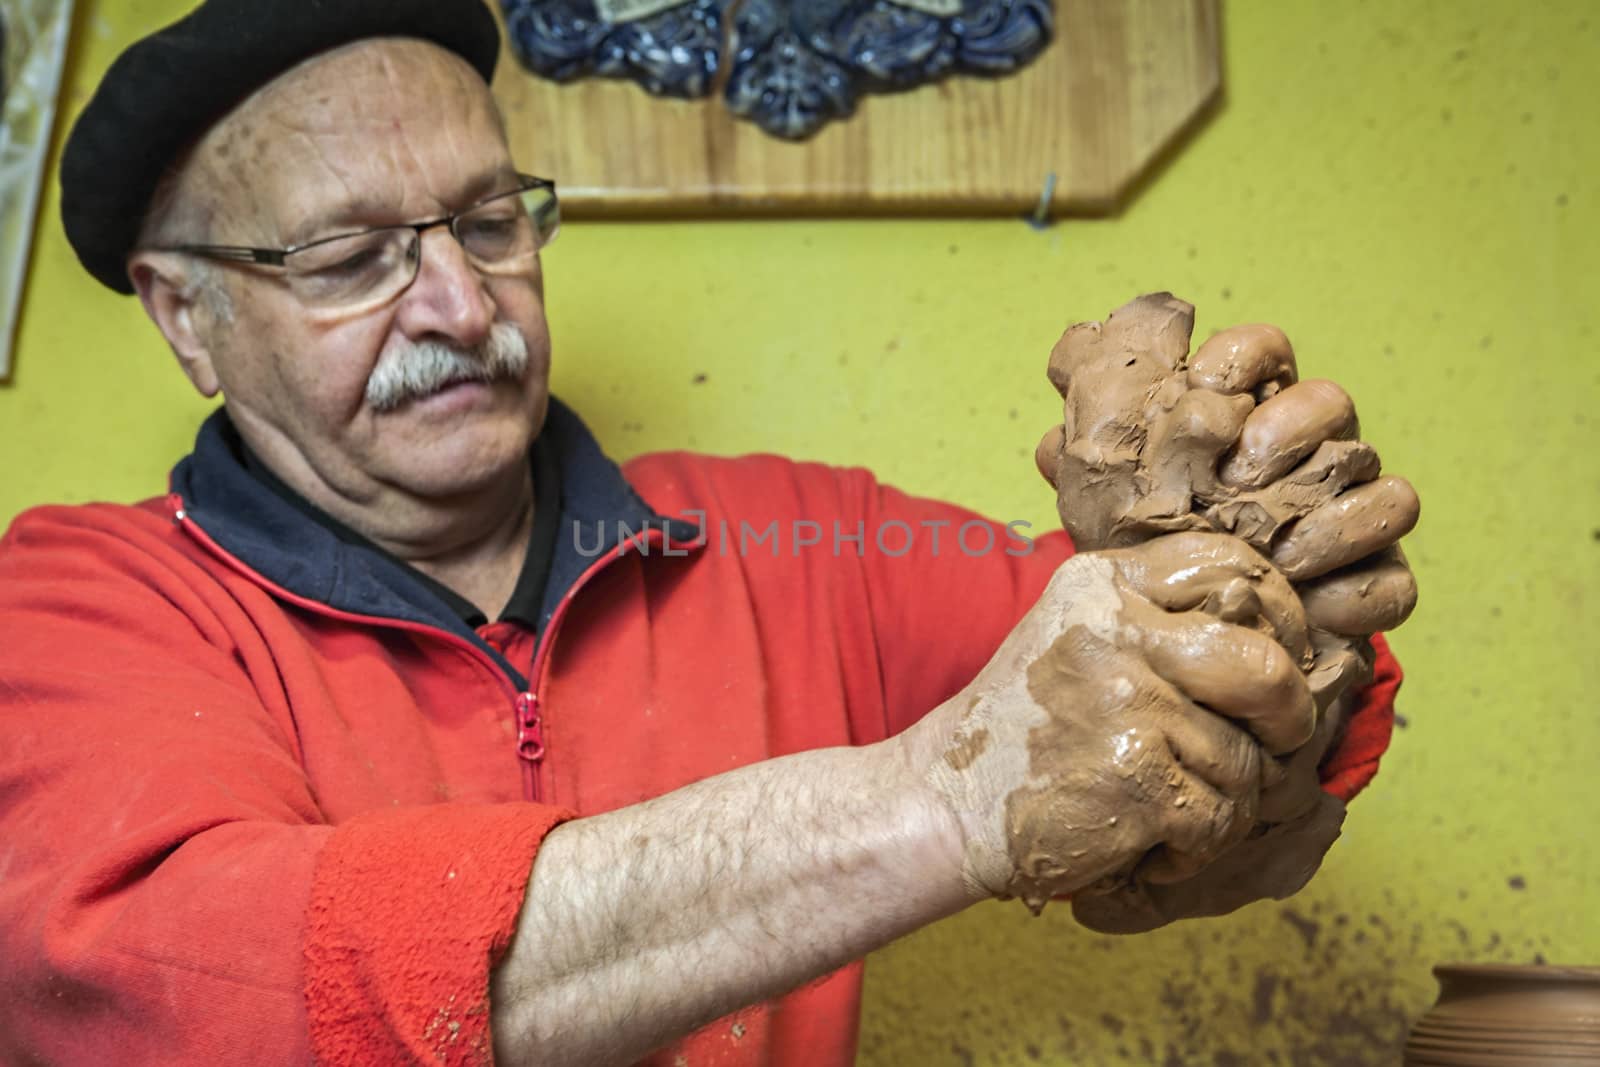 Potter preparing a piece of clay to start working by digicomphoto